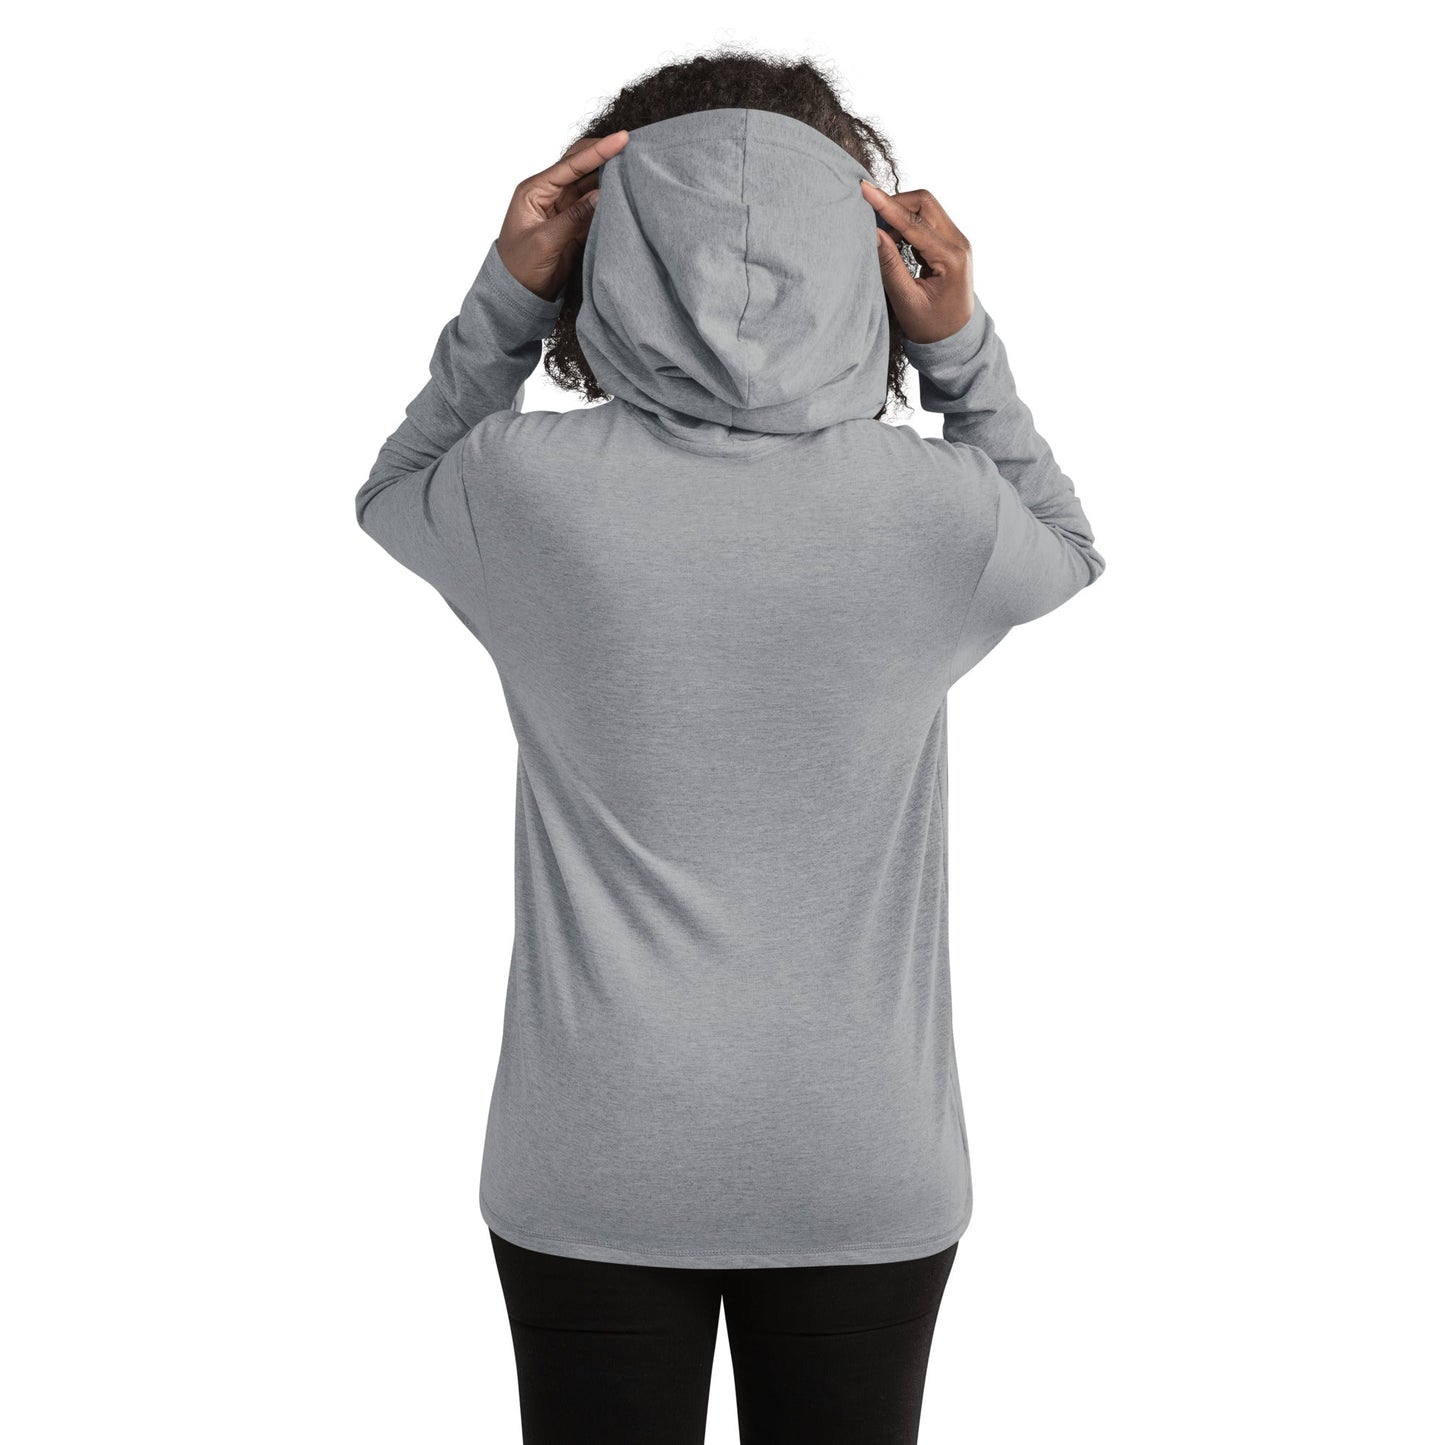 "Thanks it has Pockets" Lightweight hoodie. - The Nerd Supply Company